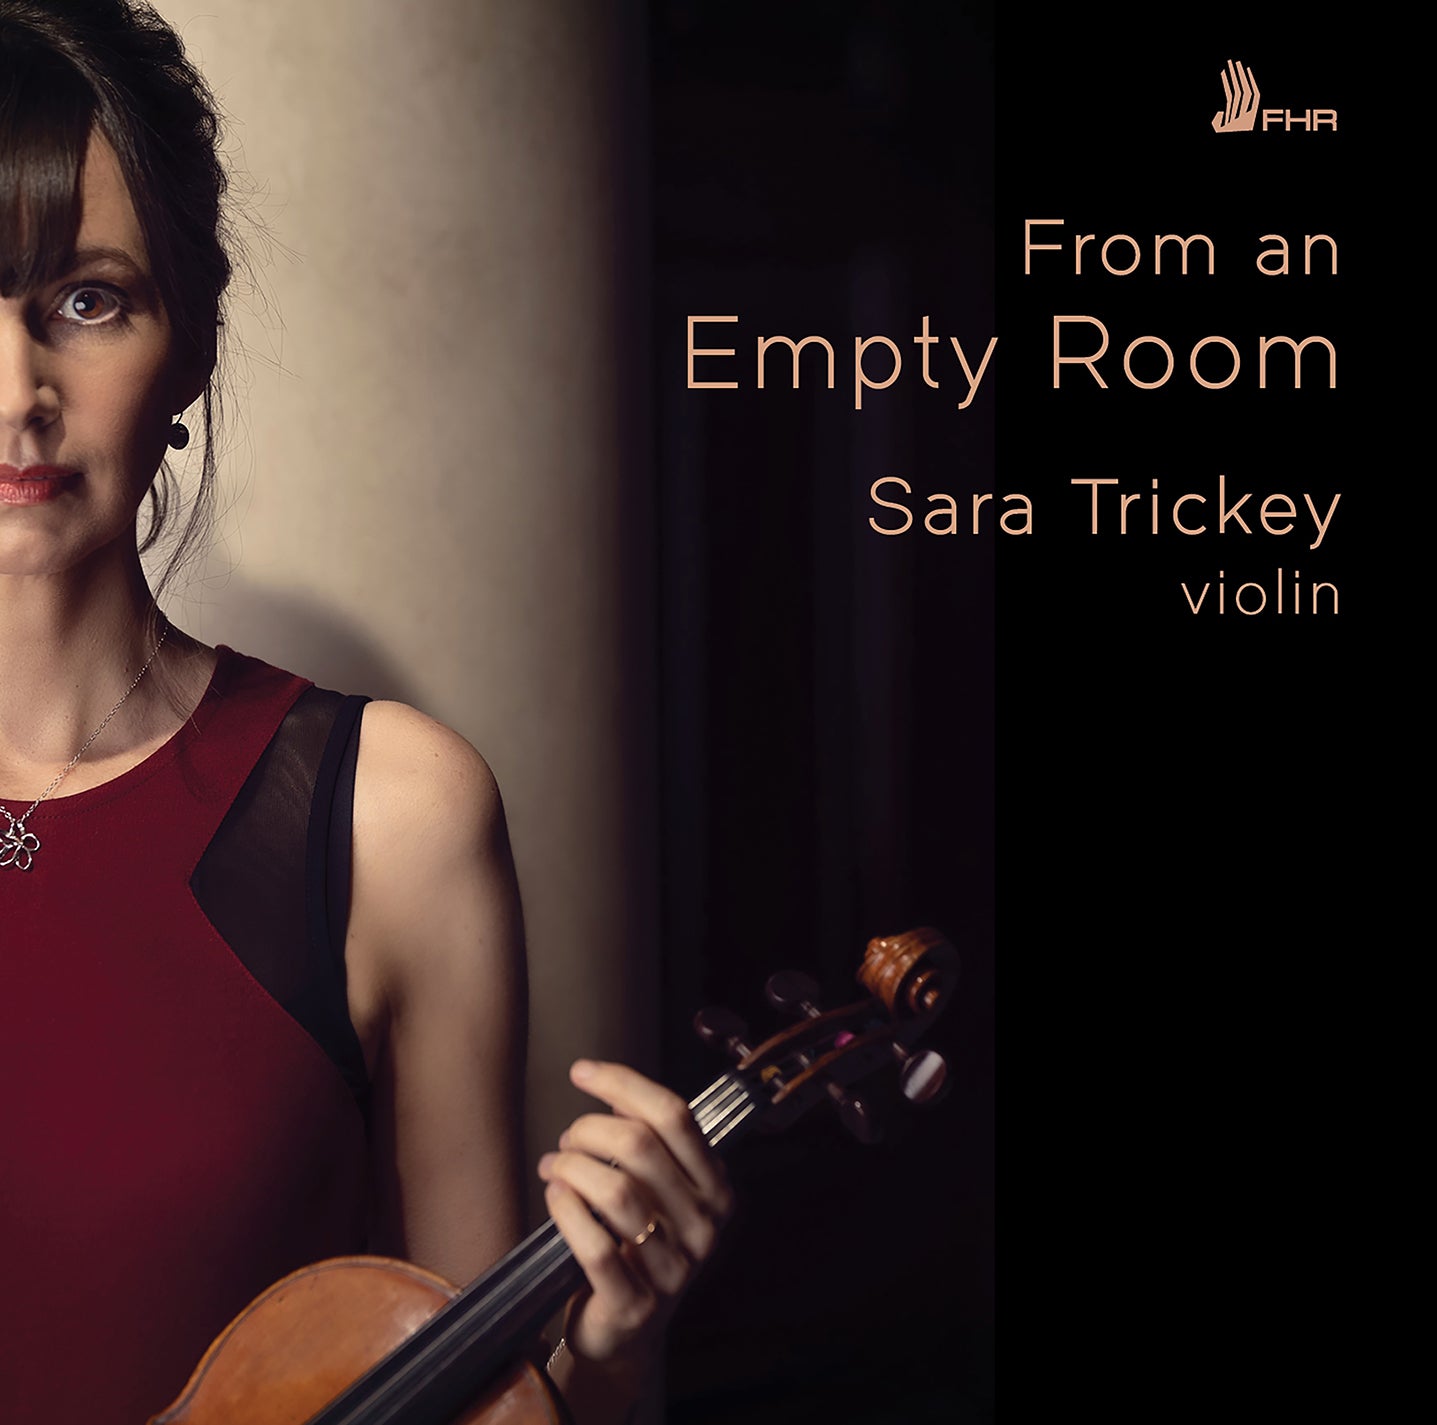 From an Empty Room - Solo Violin Music / Sara Trickey